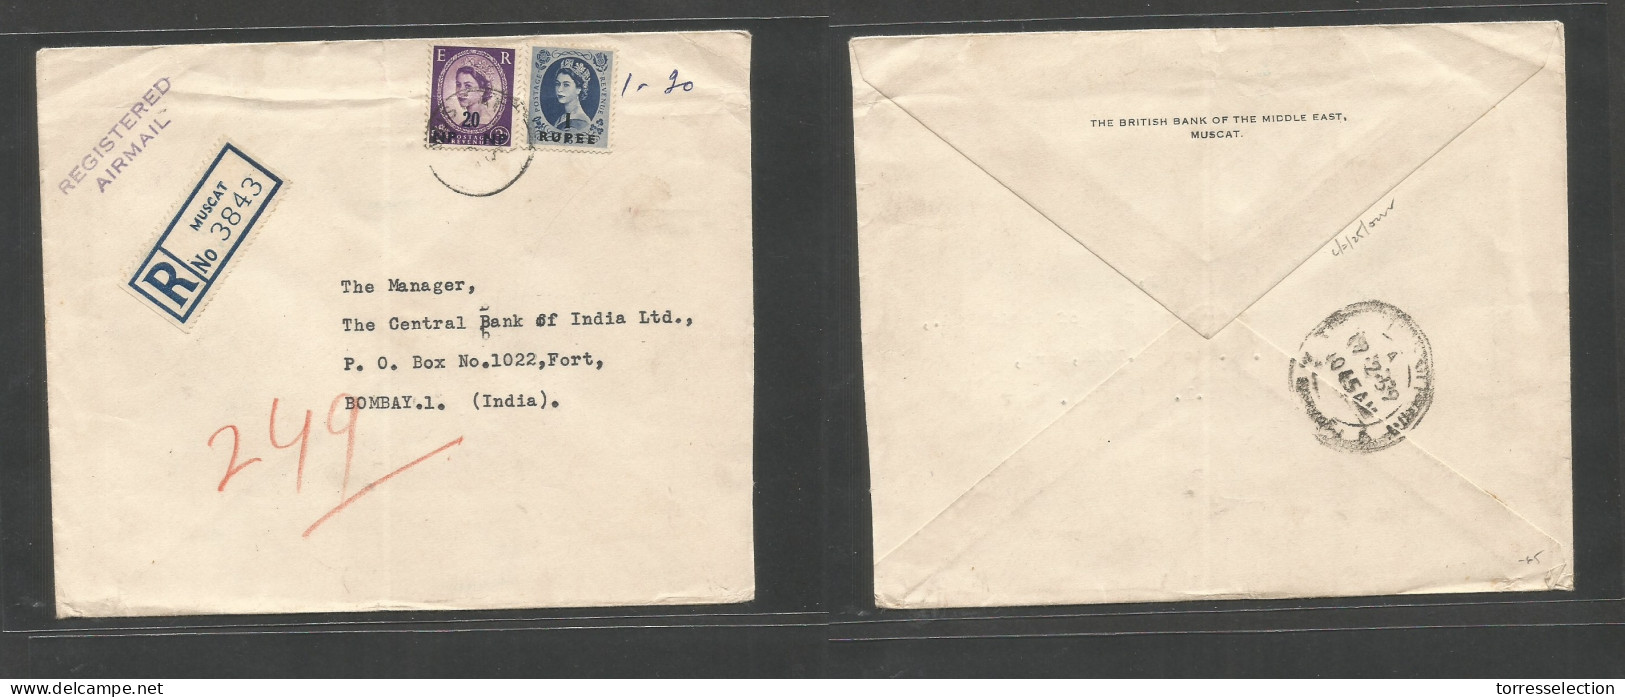 OMAN. 1958 (Febr) Muscat - Bomaby, India (17 Febr) Registered Air Multifkd Env At 1 Rupee 20 Omp Rate, Cds + R-label. Fi - Oman